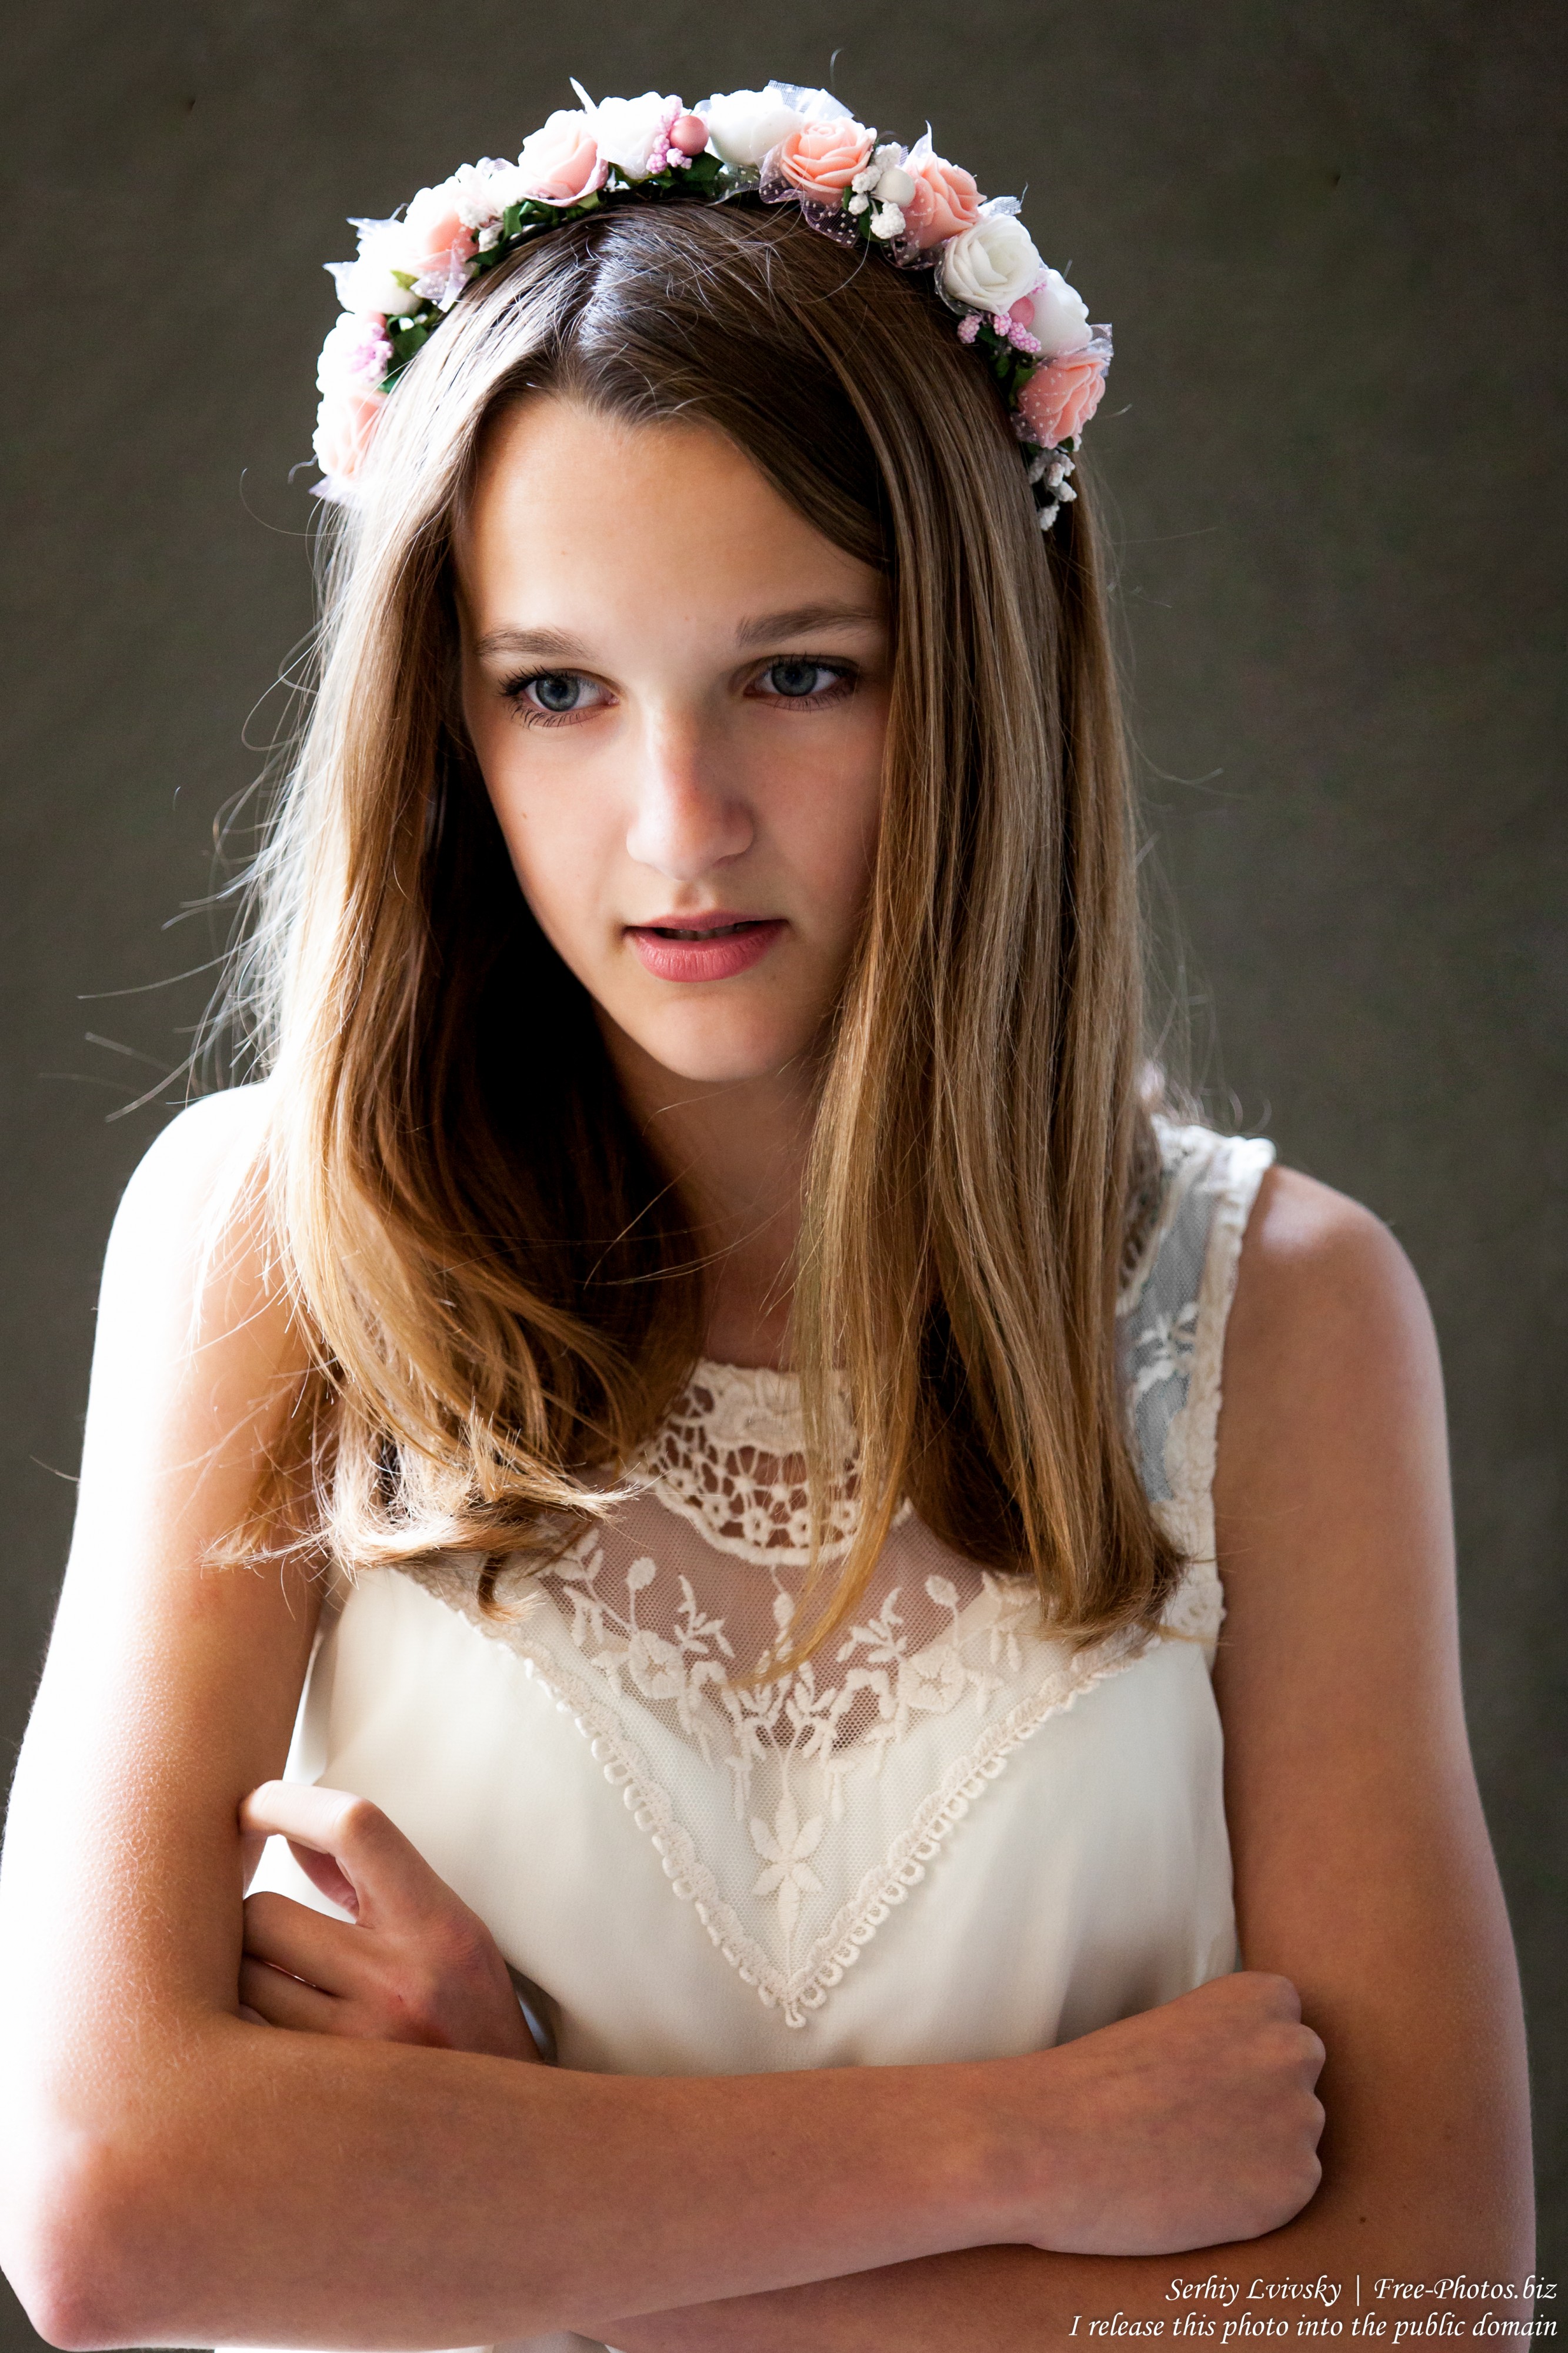 a 13-year-old Catholic girl in a white dress photographed in June 2015, picture 4